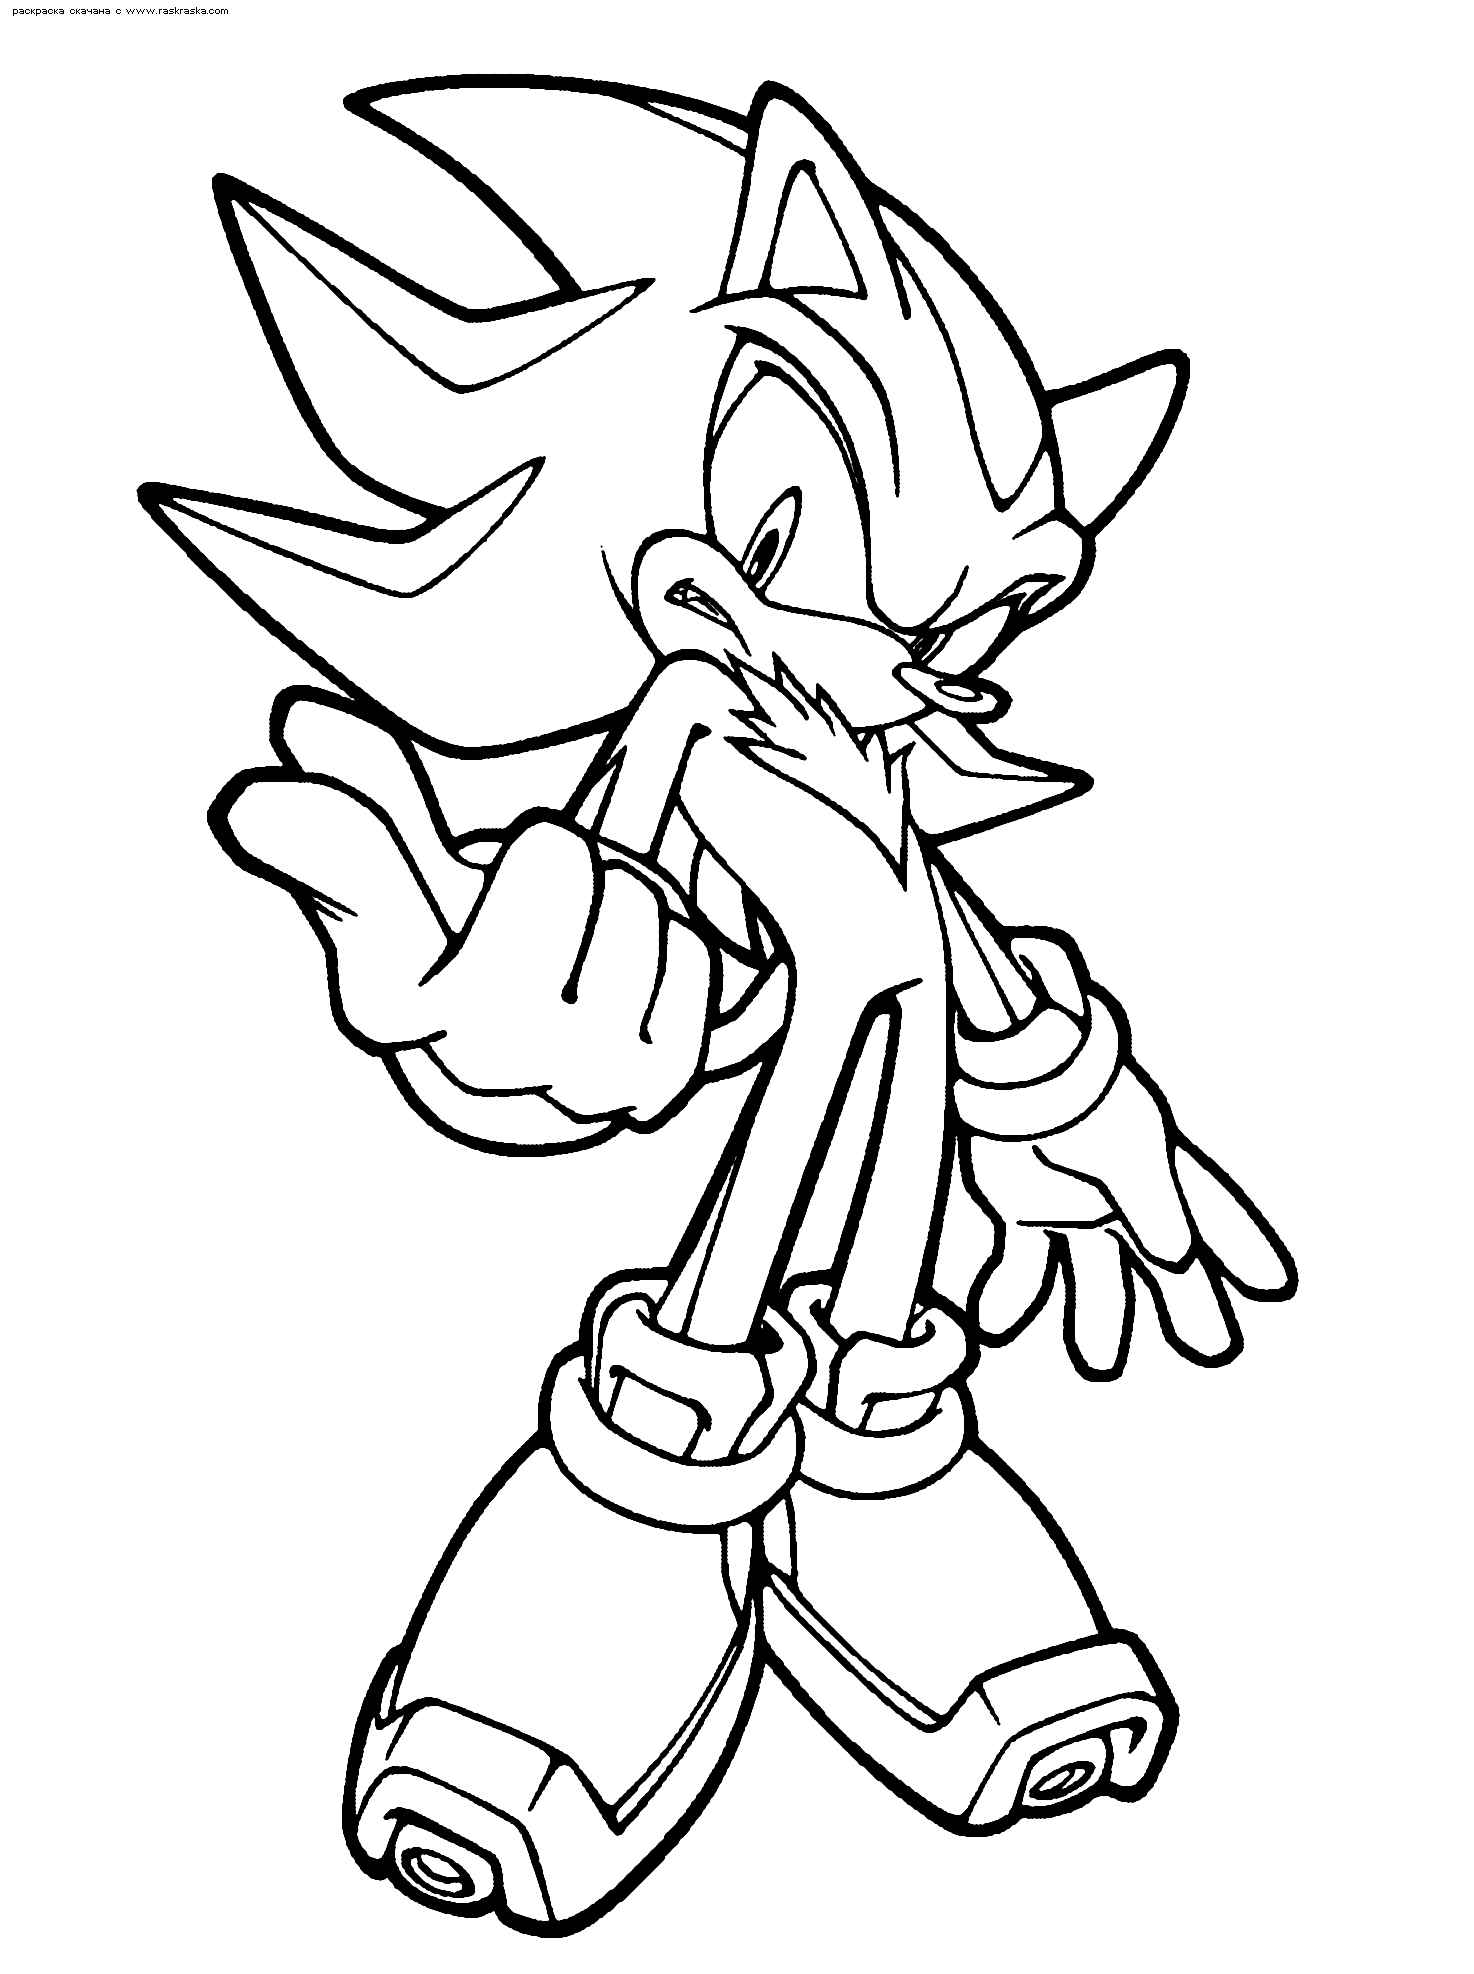 sonic the hedgehog coloring pages Knuckles - Coloring Pages For ...